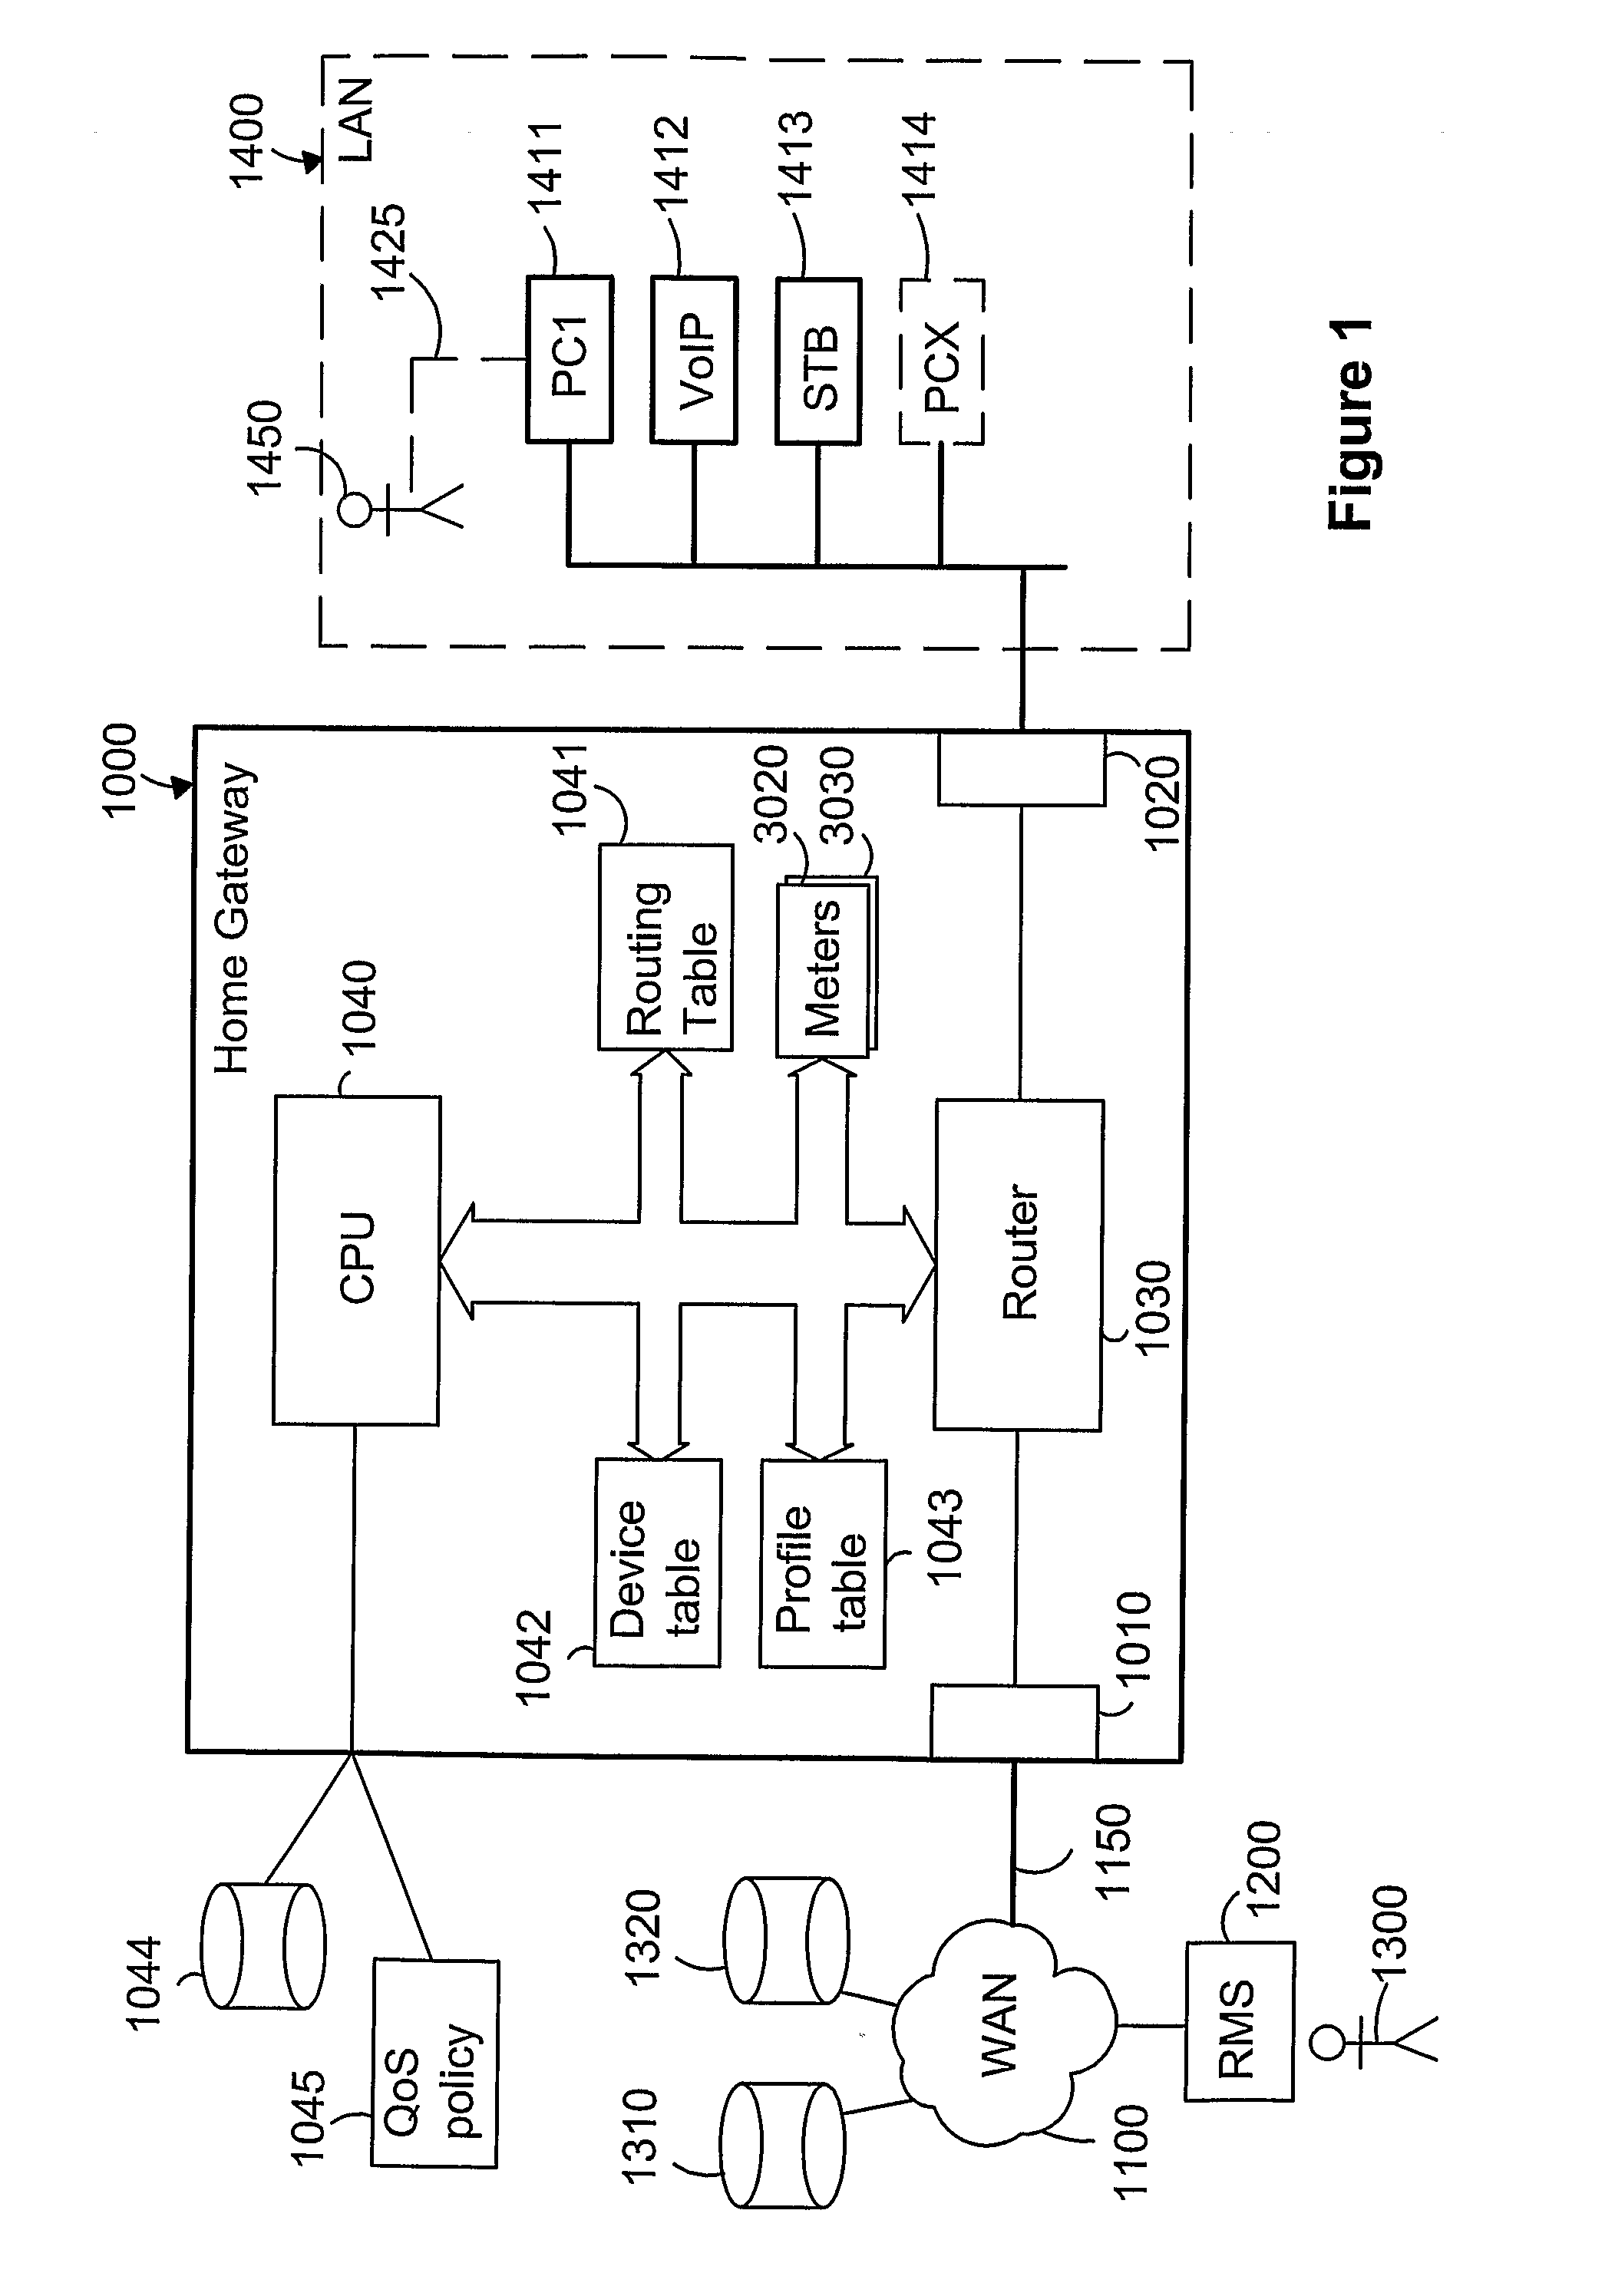 Home Gateway Device for Providing Multiple Services to Customer Devices